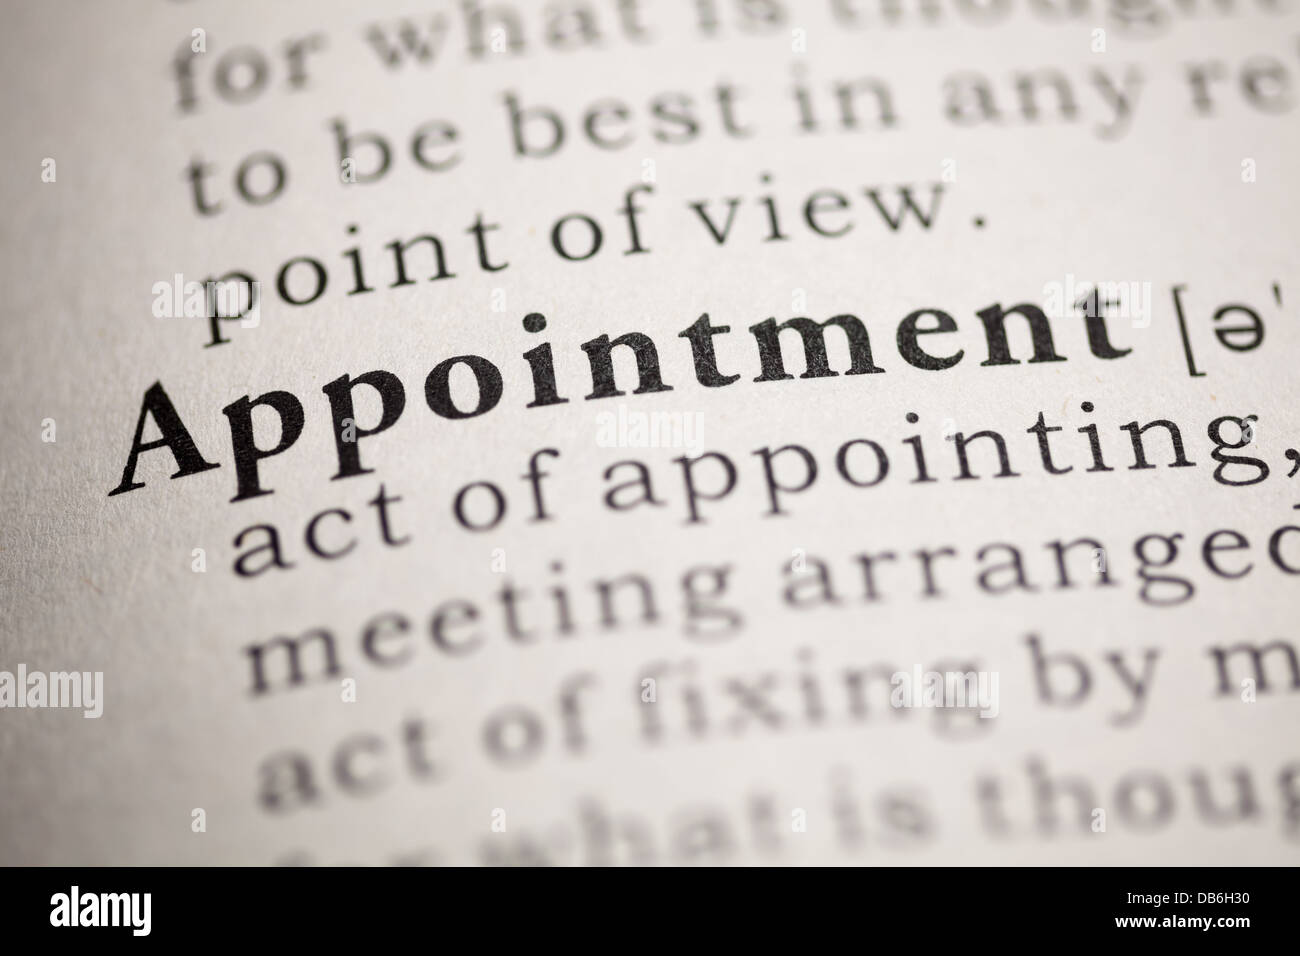 Fake Dictionary, Dictionary definition of the word Appointment. Stock Photo